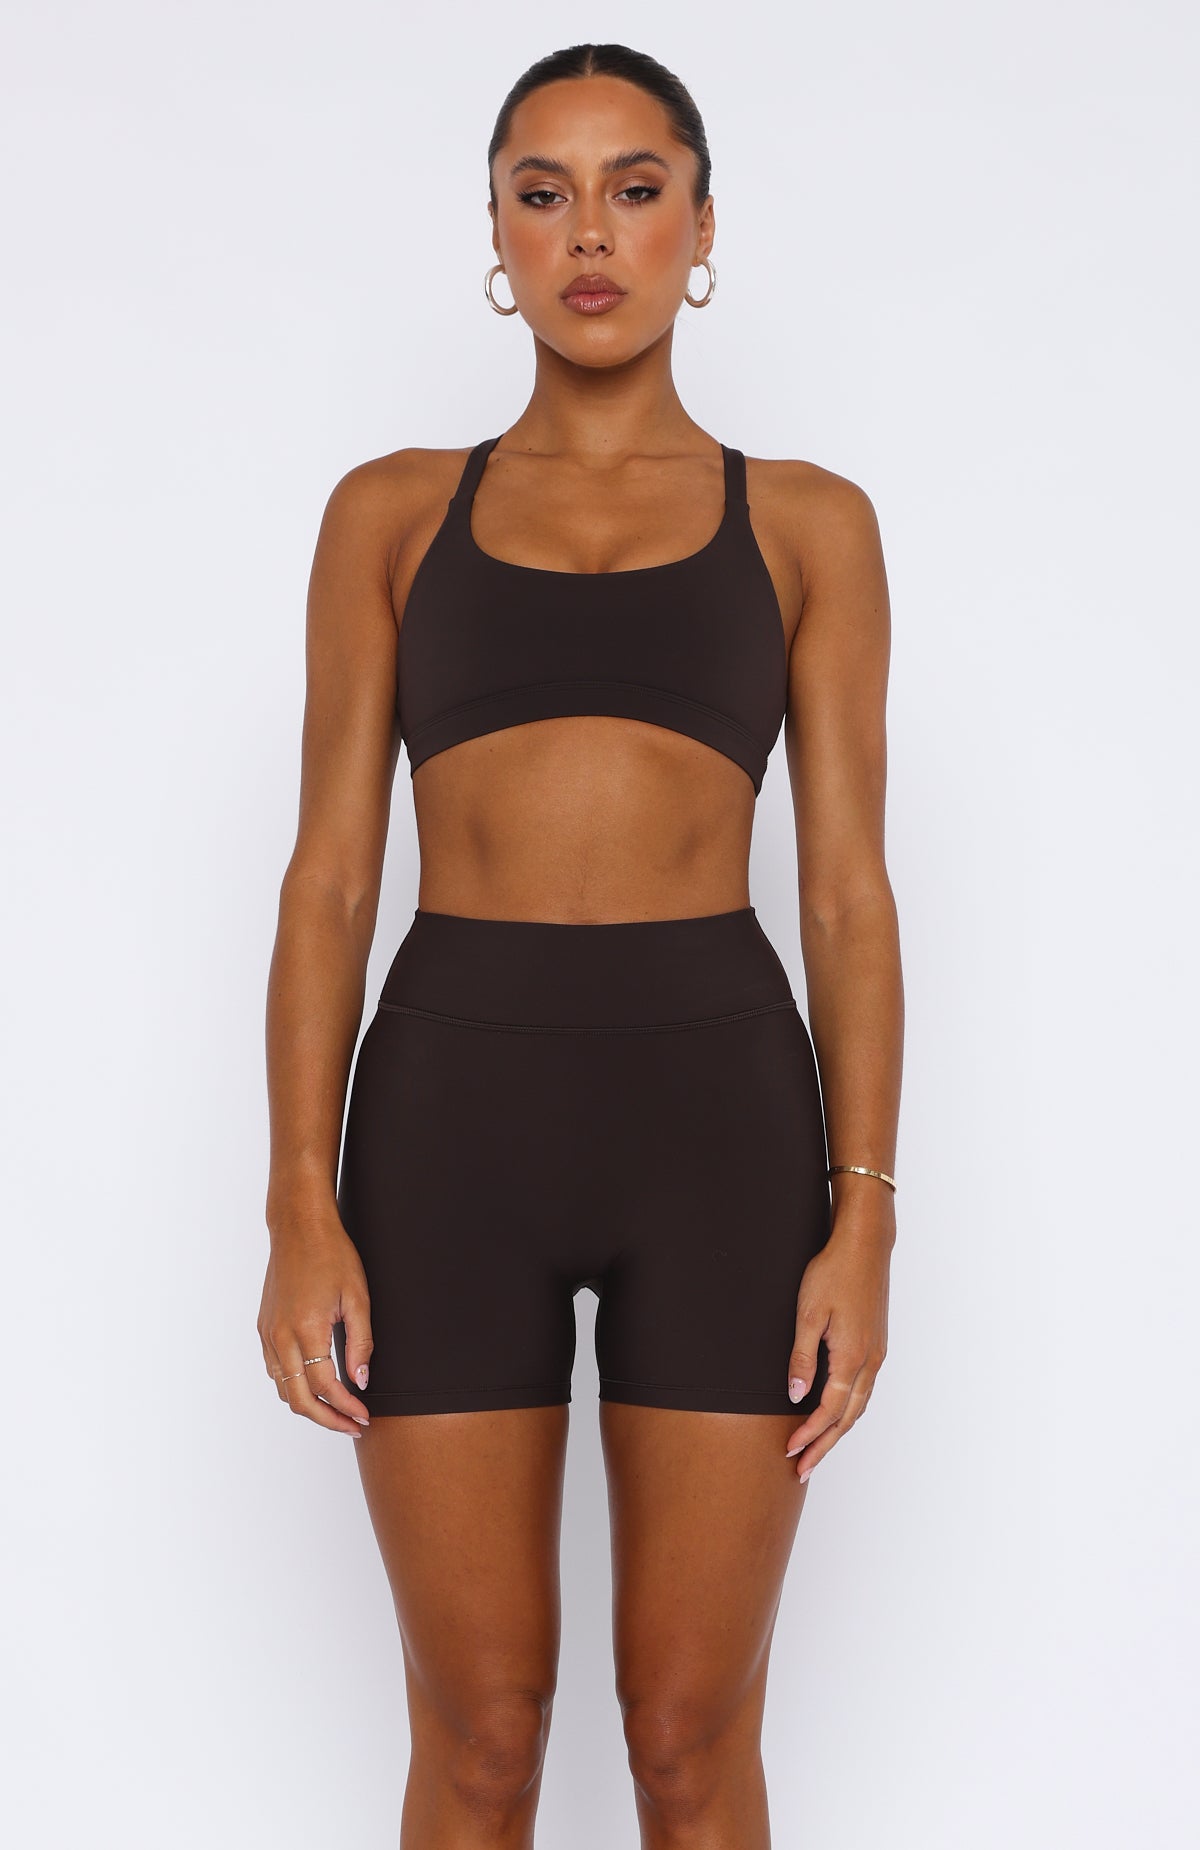  Black Workout Sets for Women: 3 Piece Yoga Outfit Tracksuits  High Waisted Running Biker Shorts with Strap Sport Bra Shirt Crop Top  Exercise Running Clothes Athletic Gym Sets Matching Active Wear